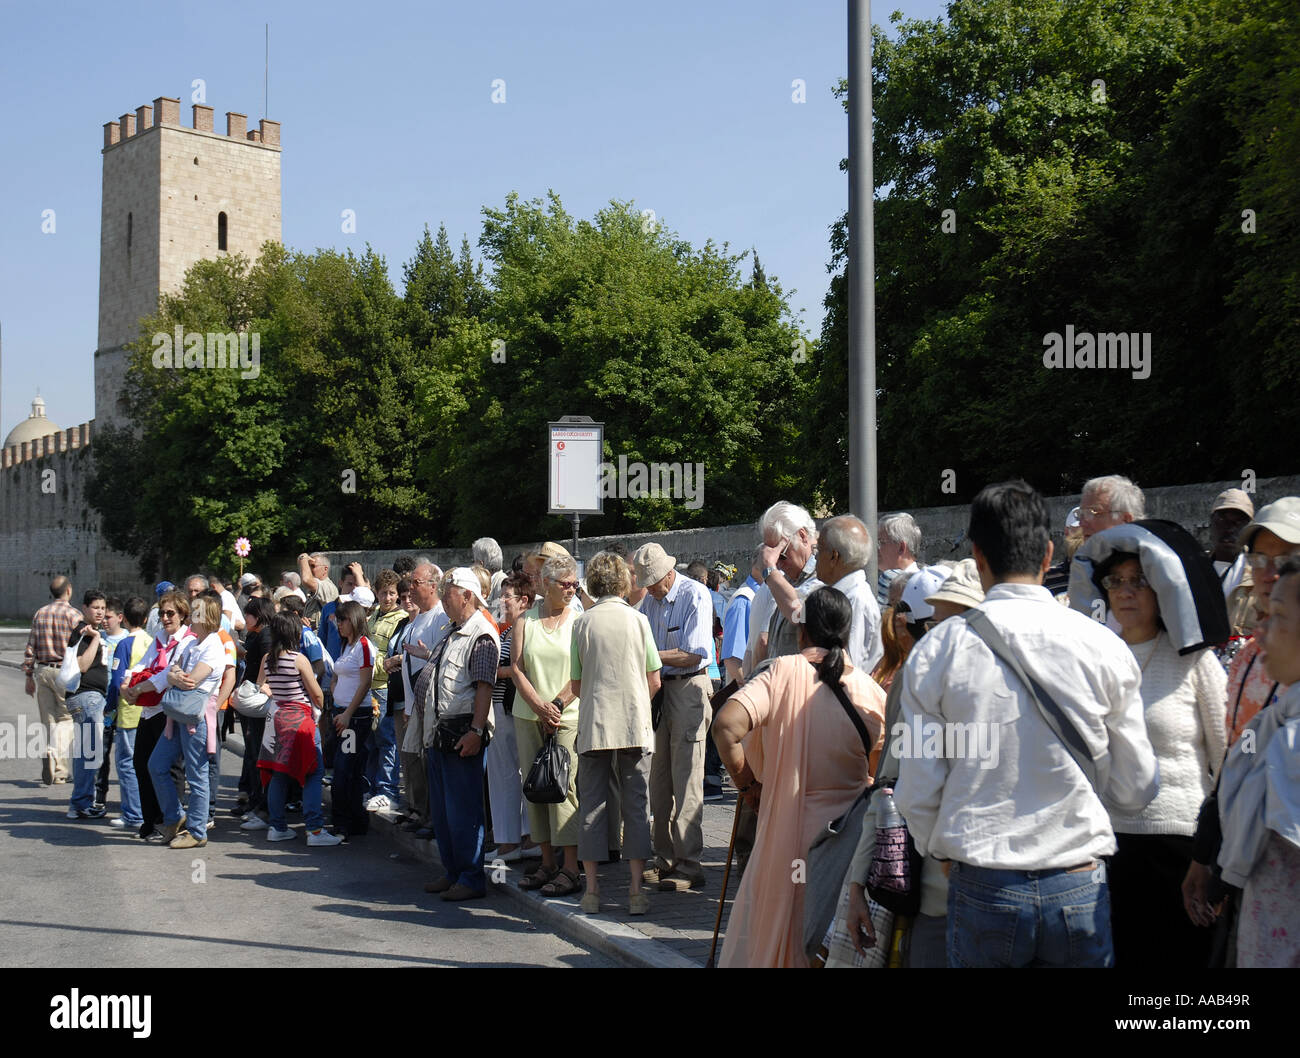 Crowds of Tourists Waiting Outside the entrance to the town of Historic Pisa Stock Photo